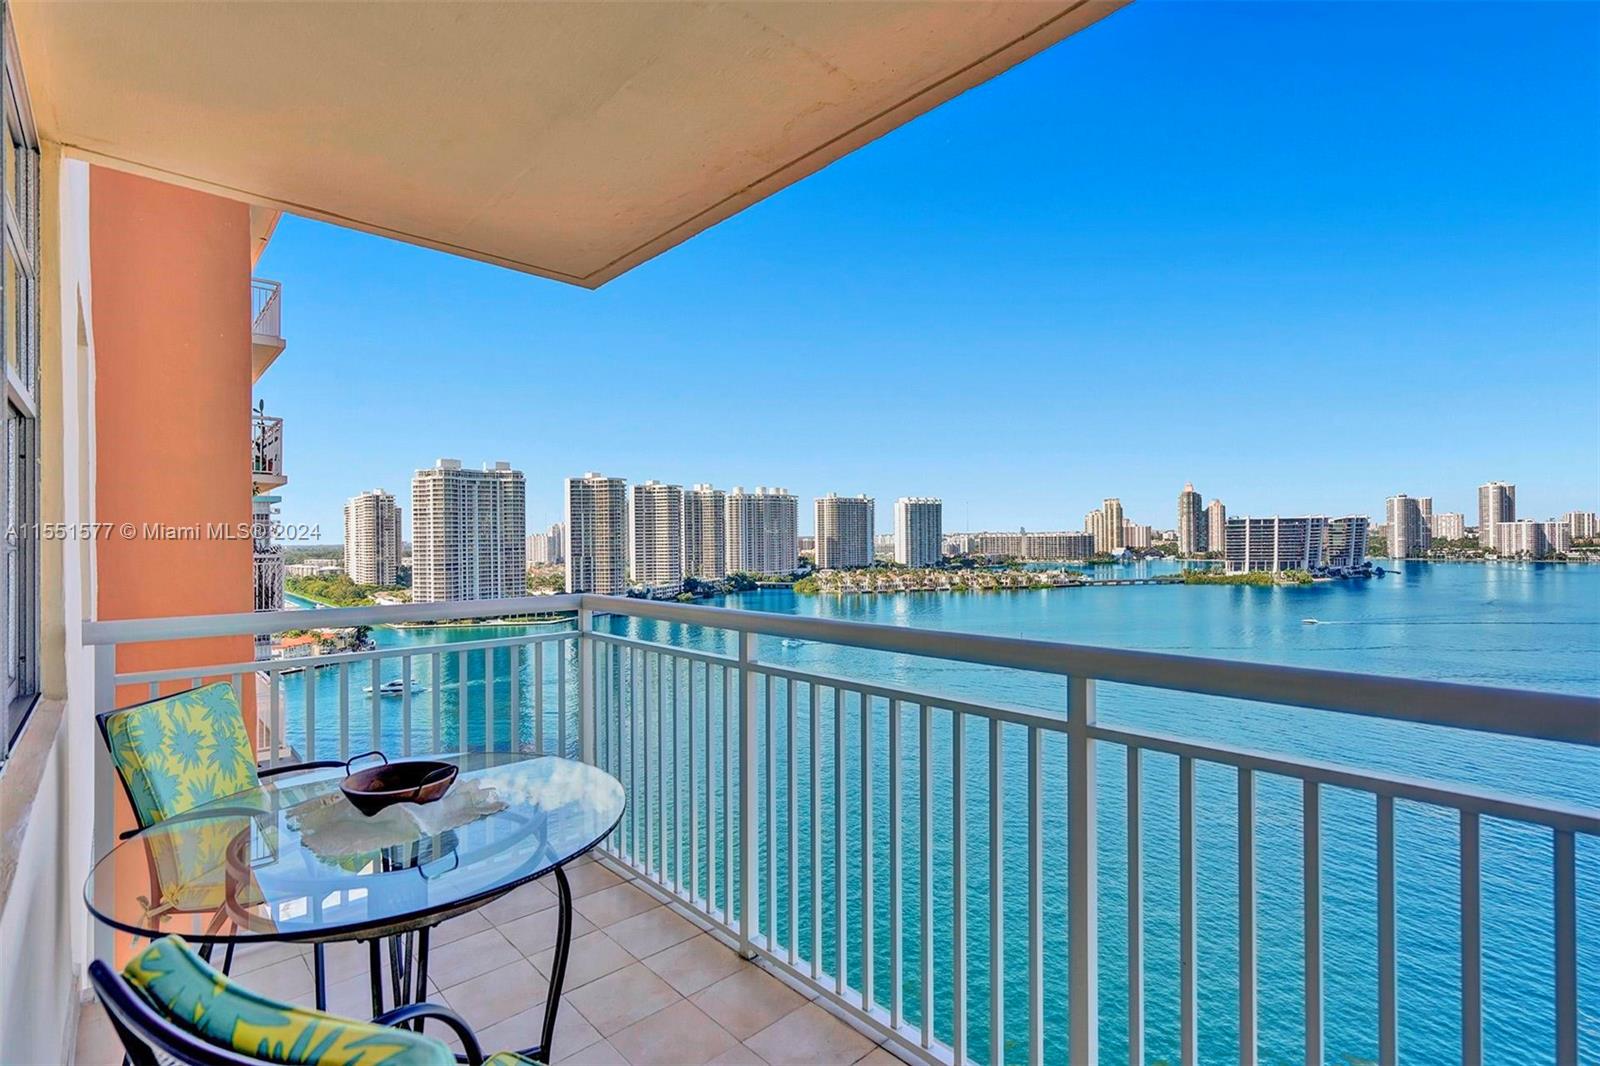 251 174th St St 2003, Sunny Isles Beach, Miami-Dade County, Florida - 2 Bedrooms  
2 Bathrooms - 